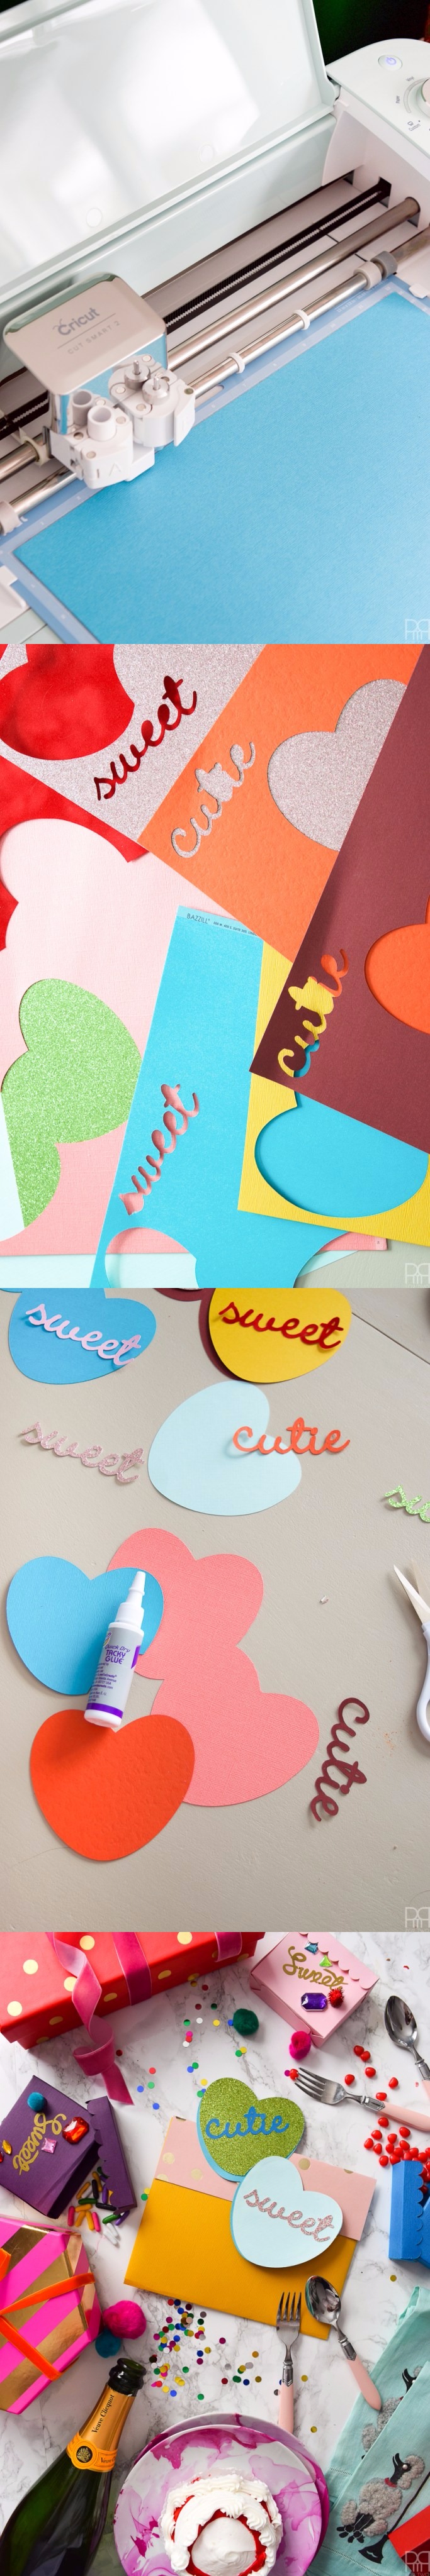 Candy Heart Cards Tutorial